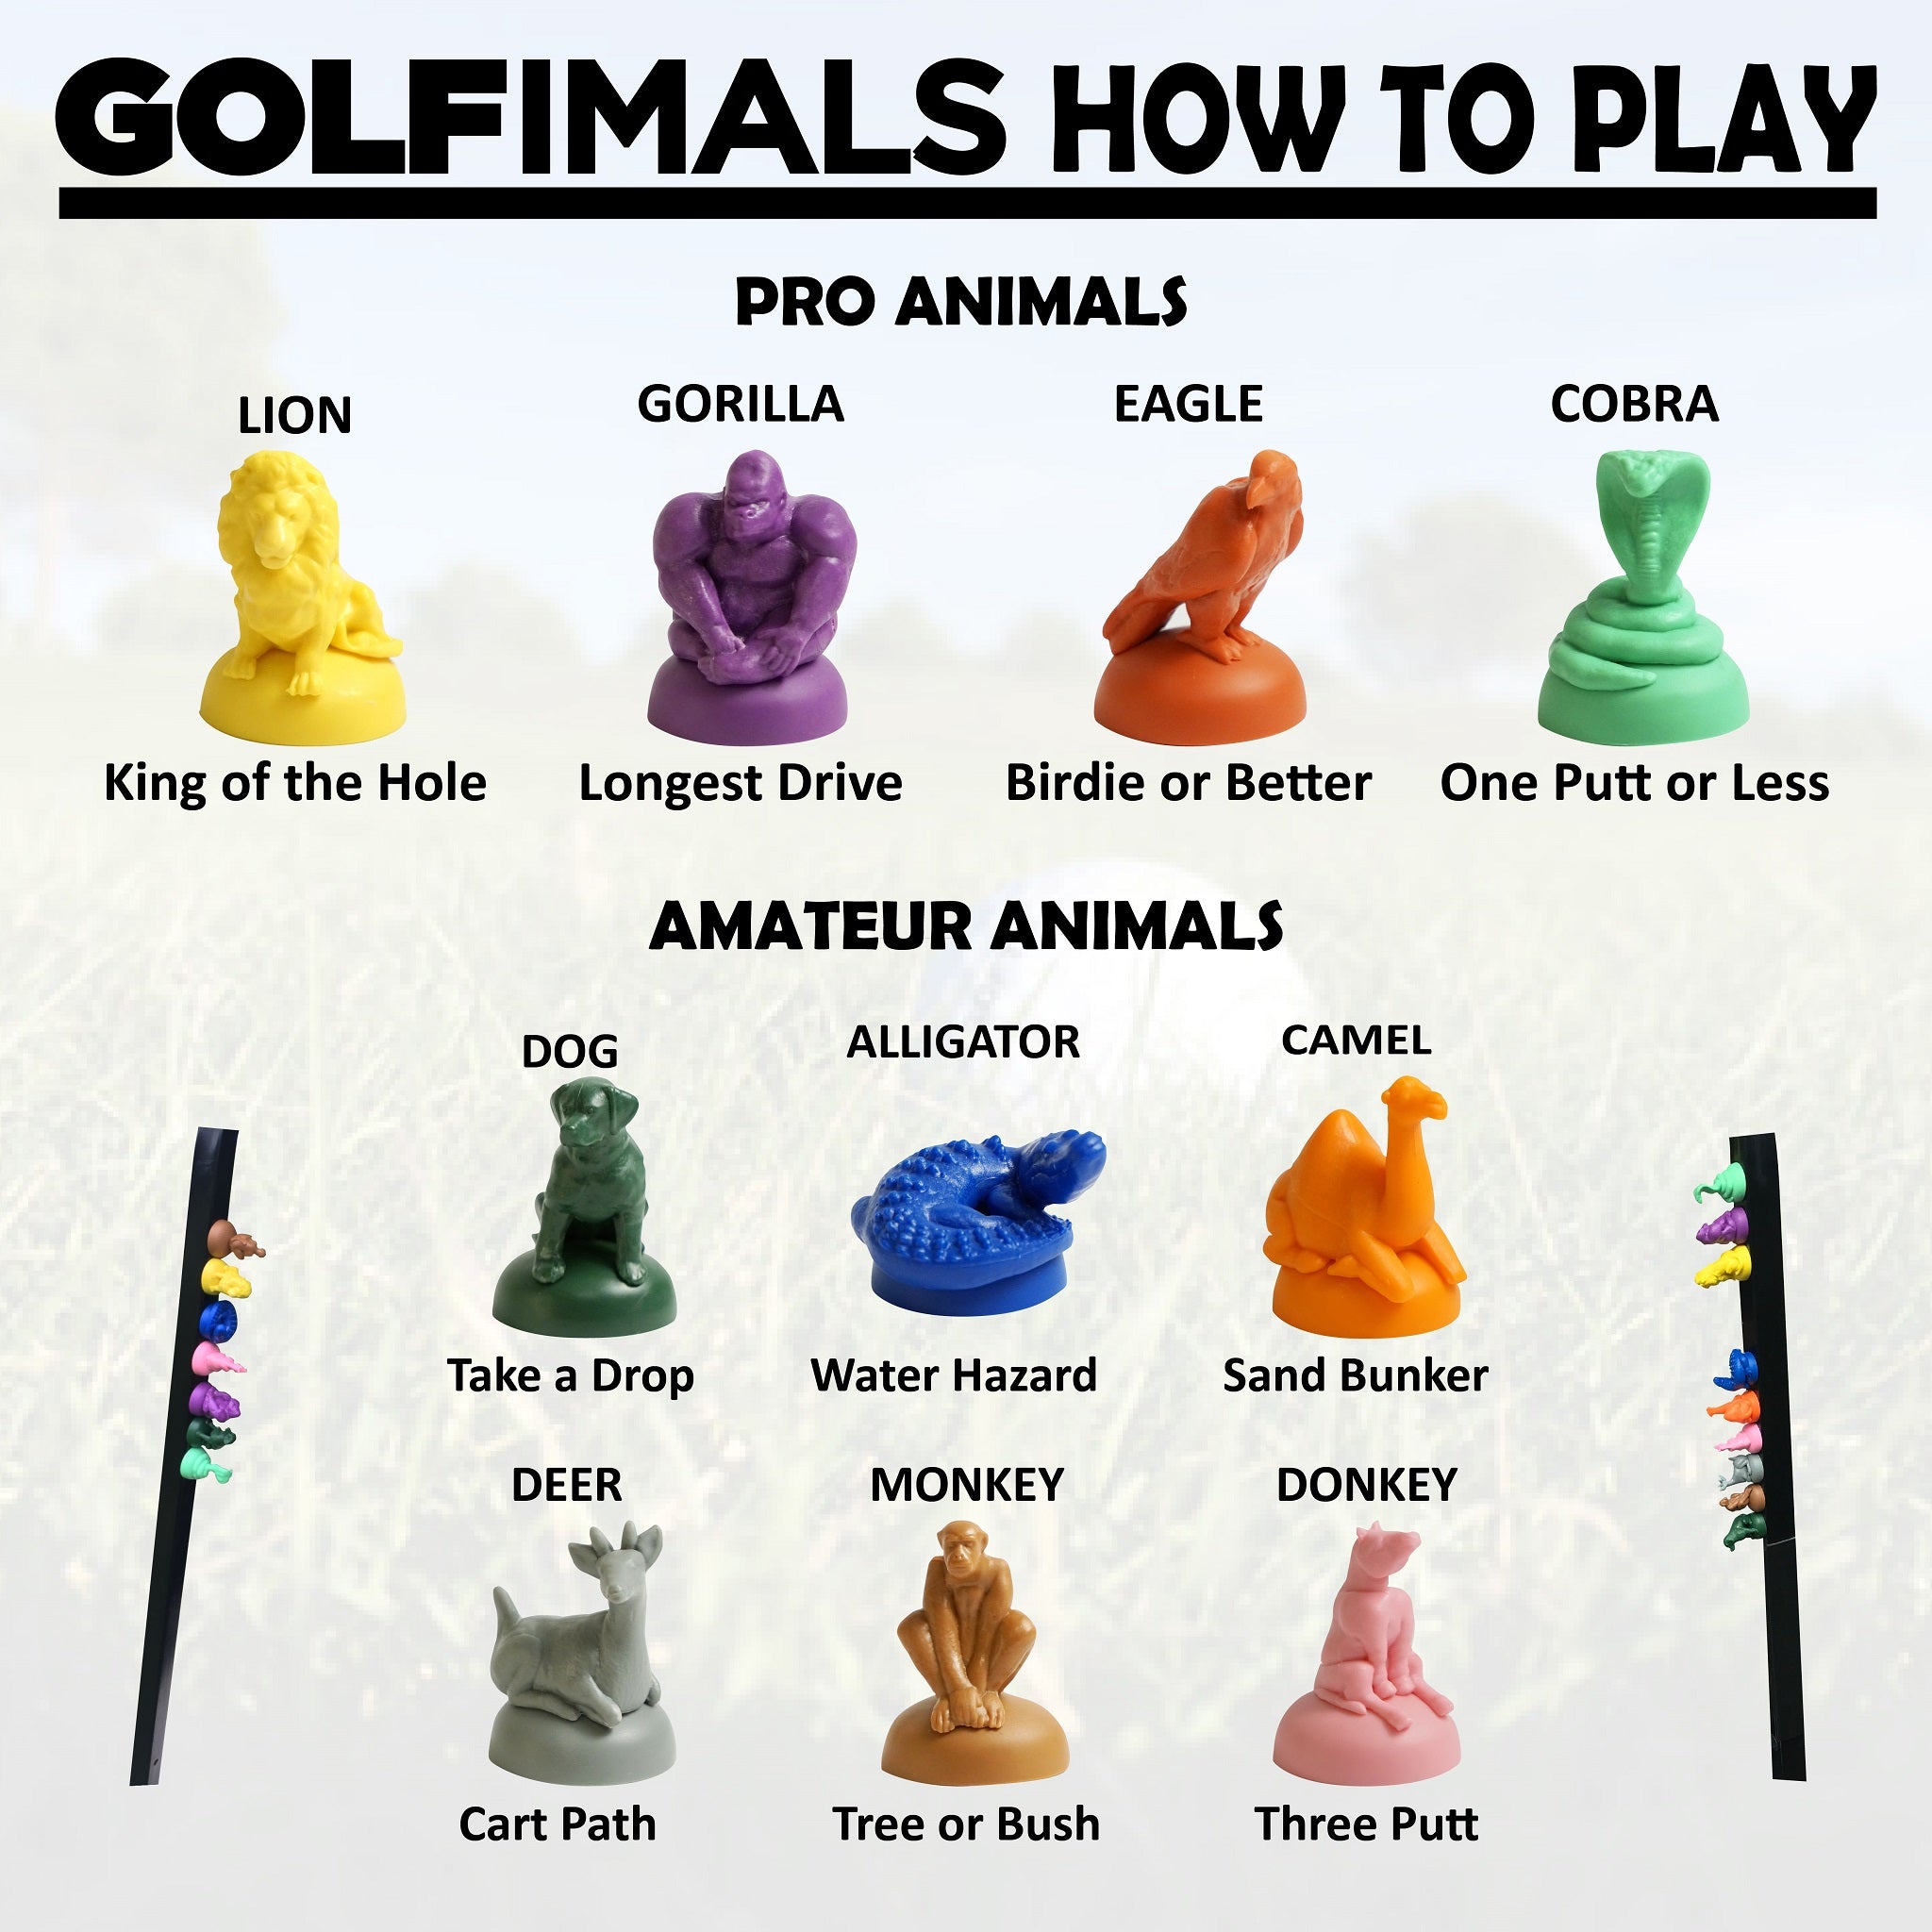 GOLFimals Lion - King of the Hole